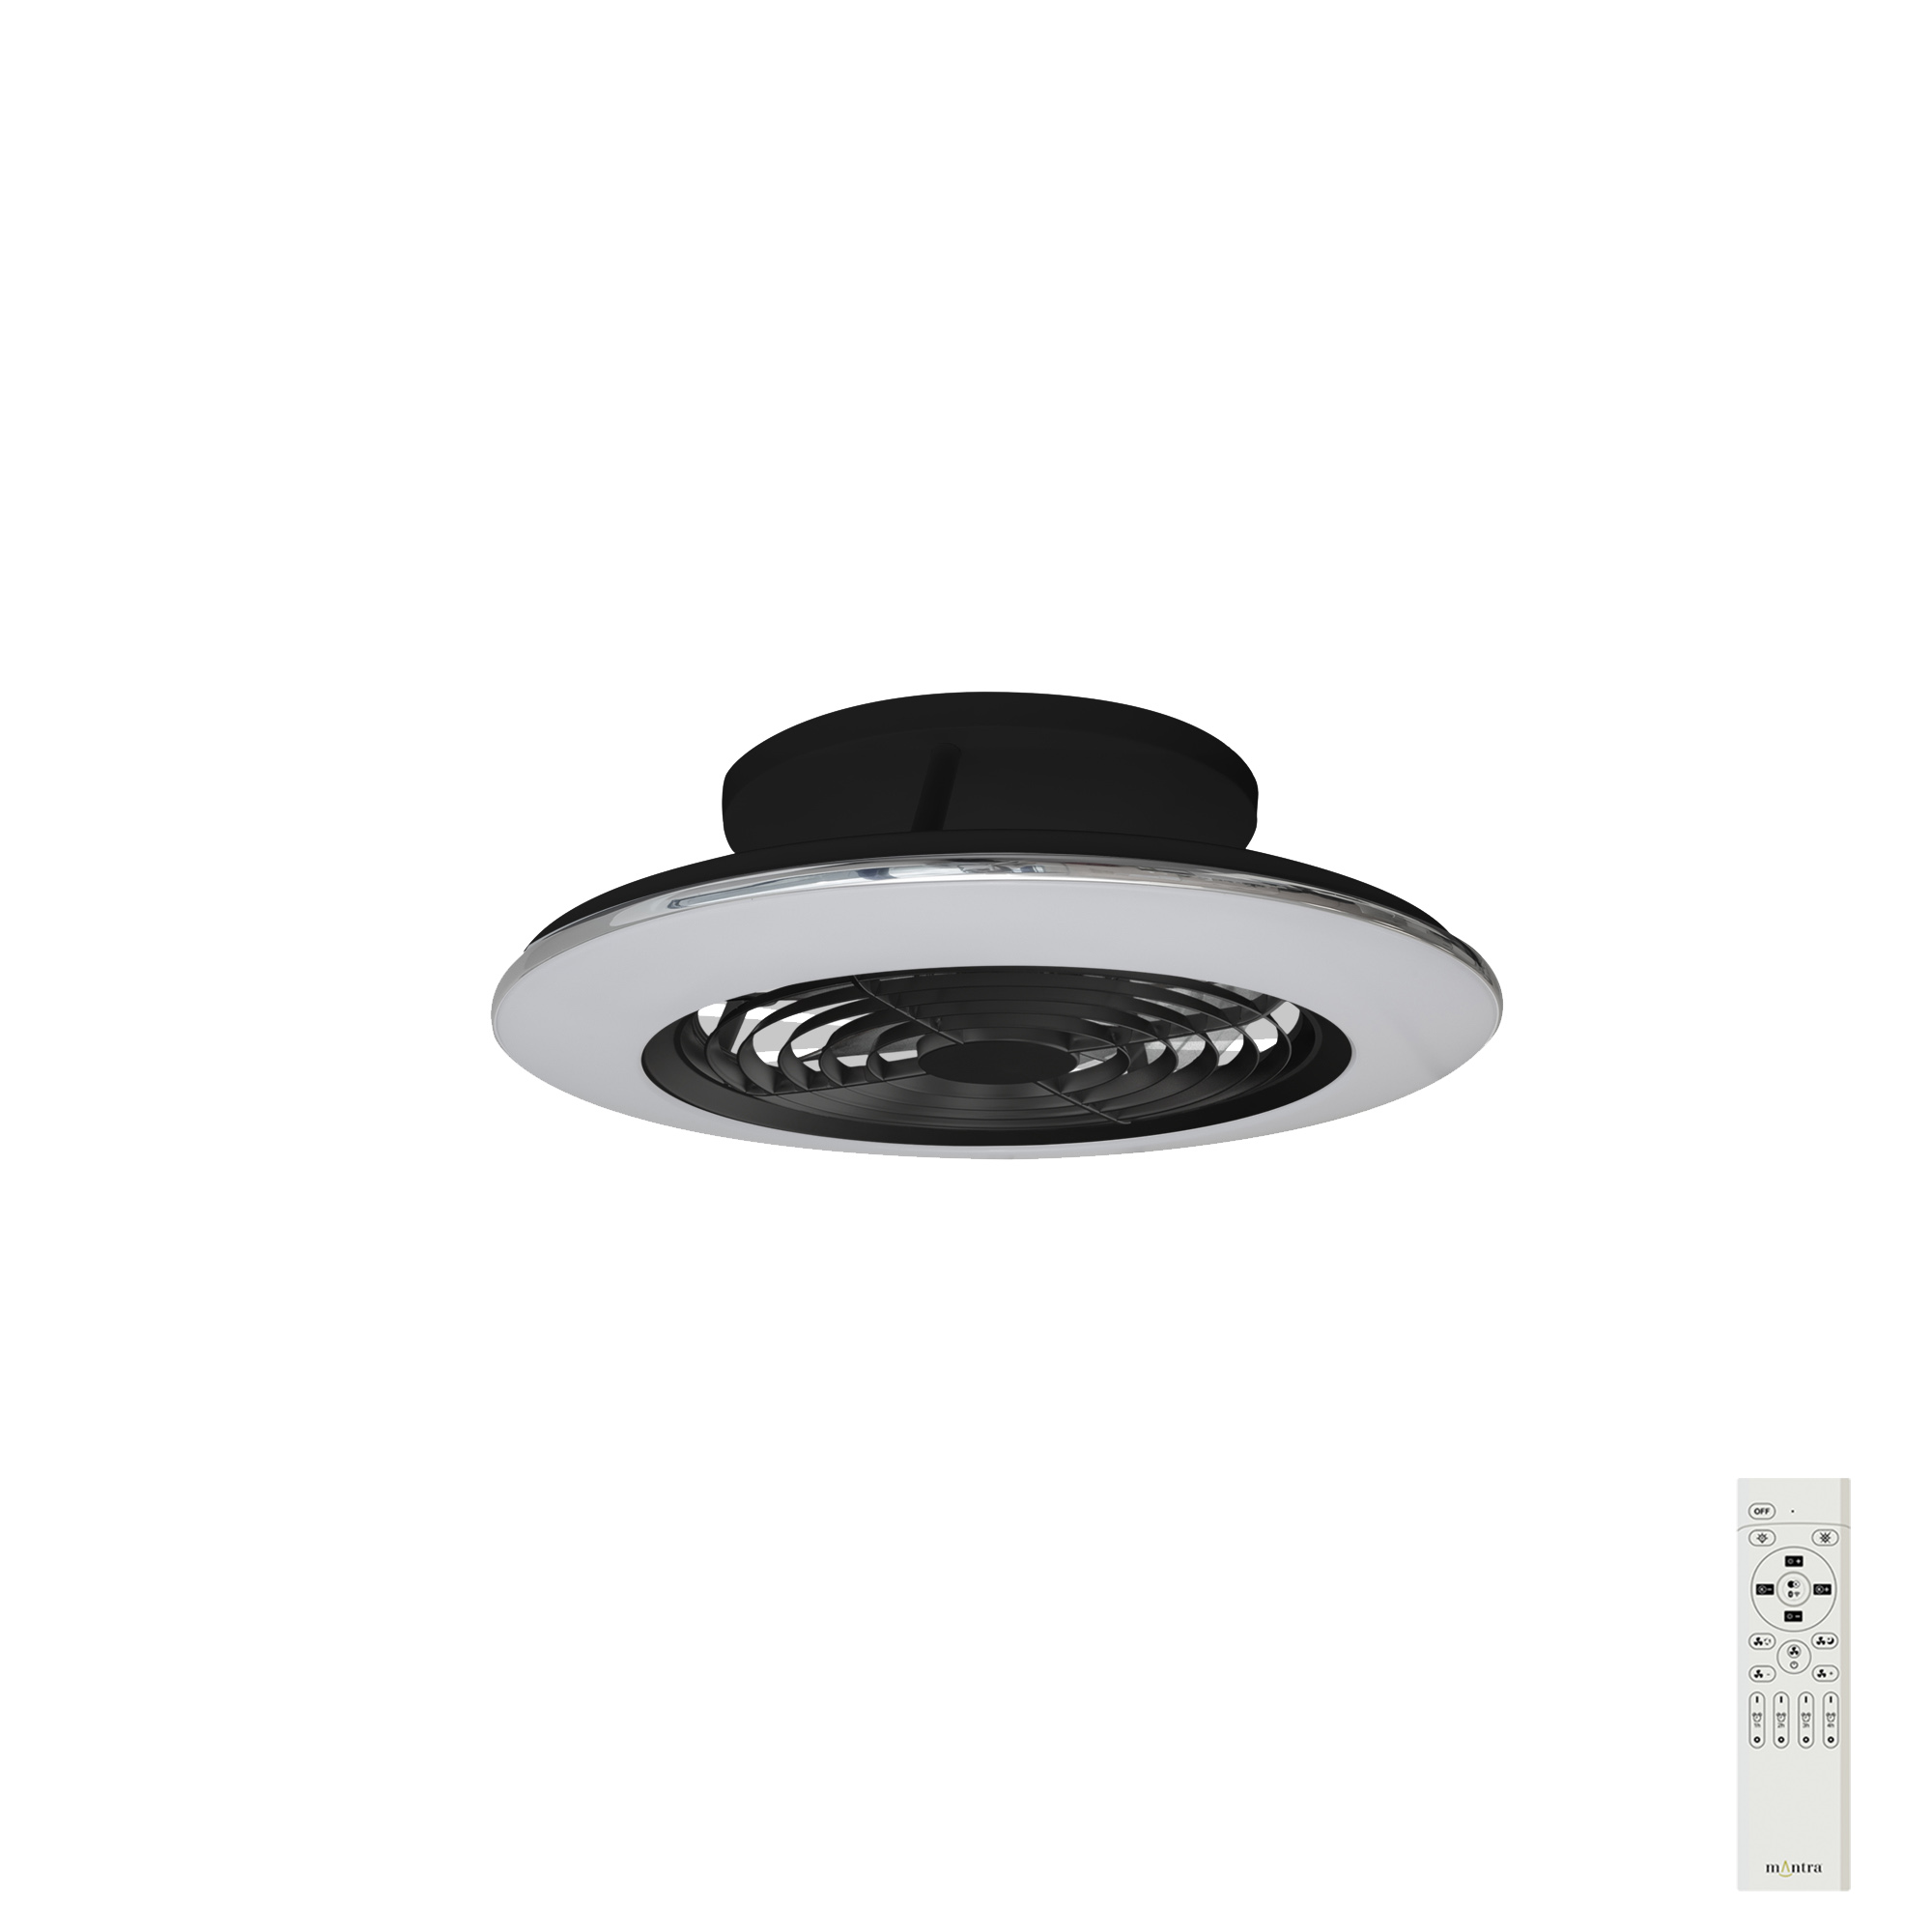 M7495  Alisio Mini 70W LED Dimmable Ceiling Light & Fan, Remote Controlled Black